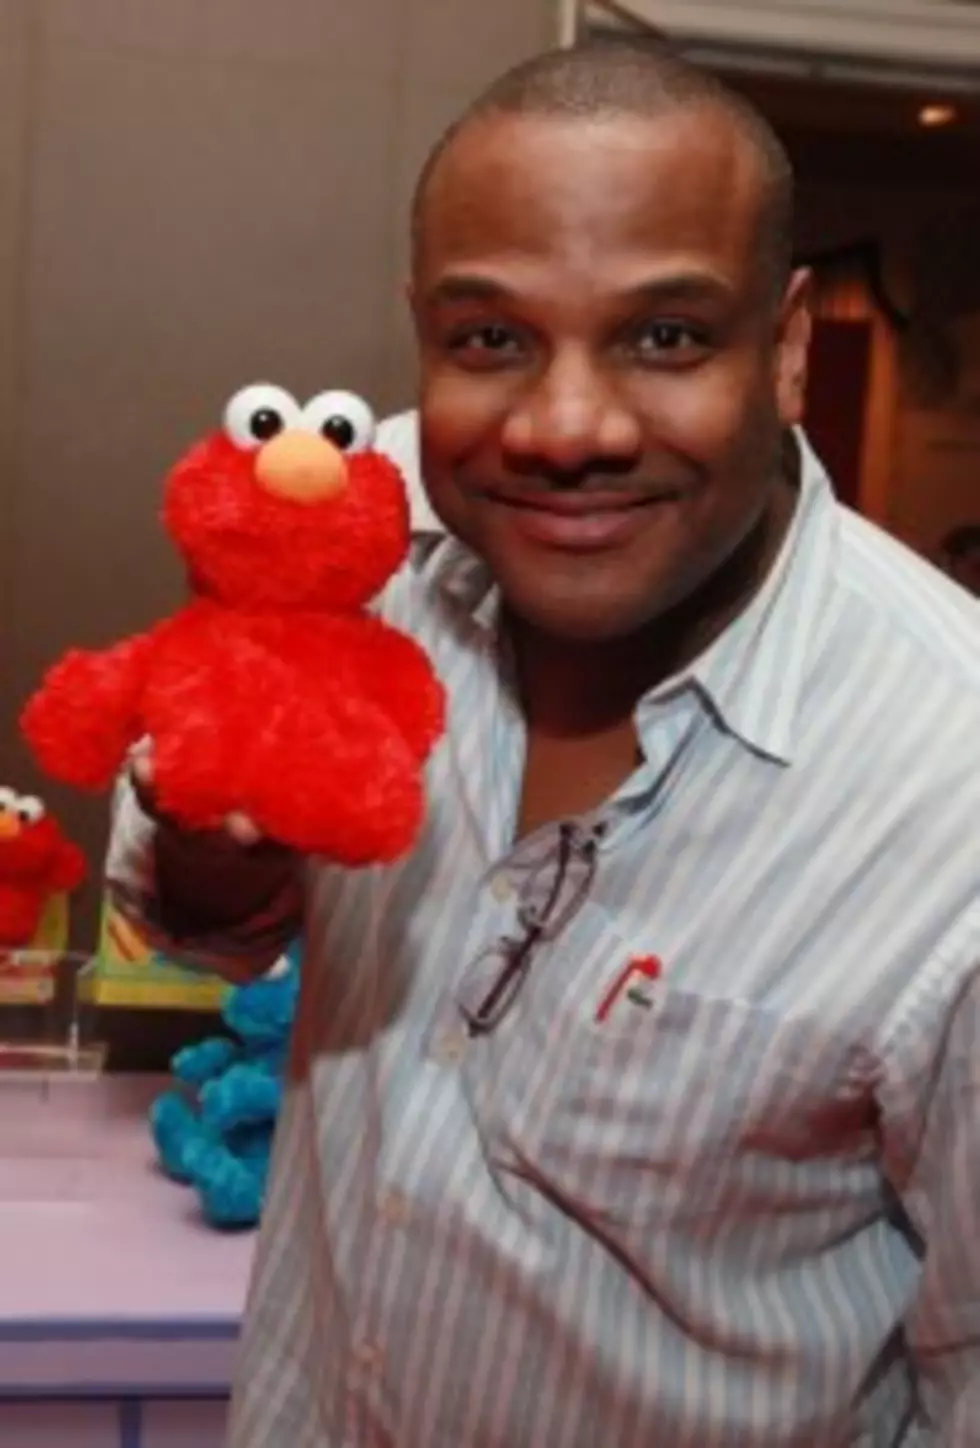 Being Elmo: A Puppeteer's Journey' An Inspirational Documentary [VIDEO]